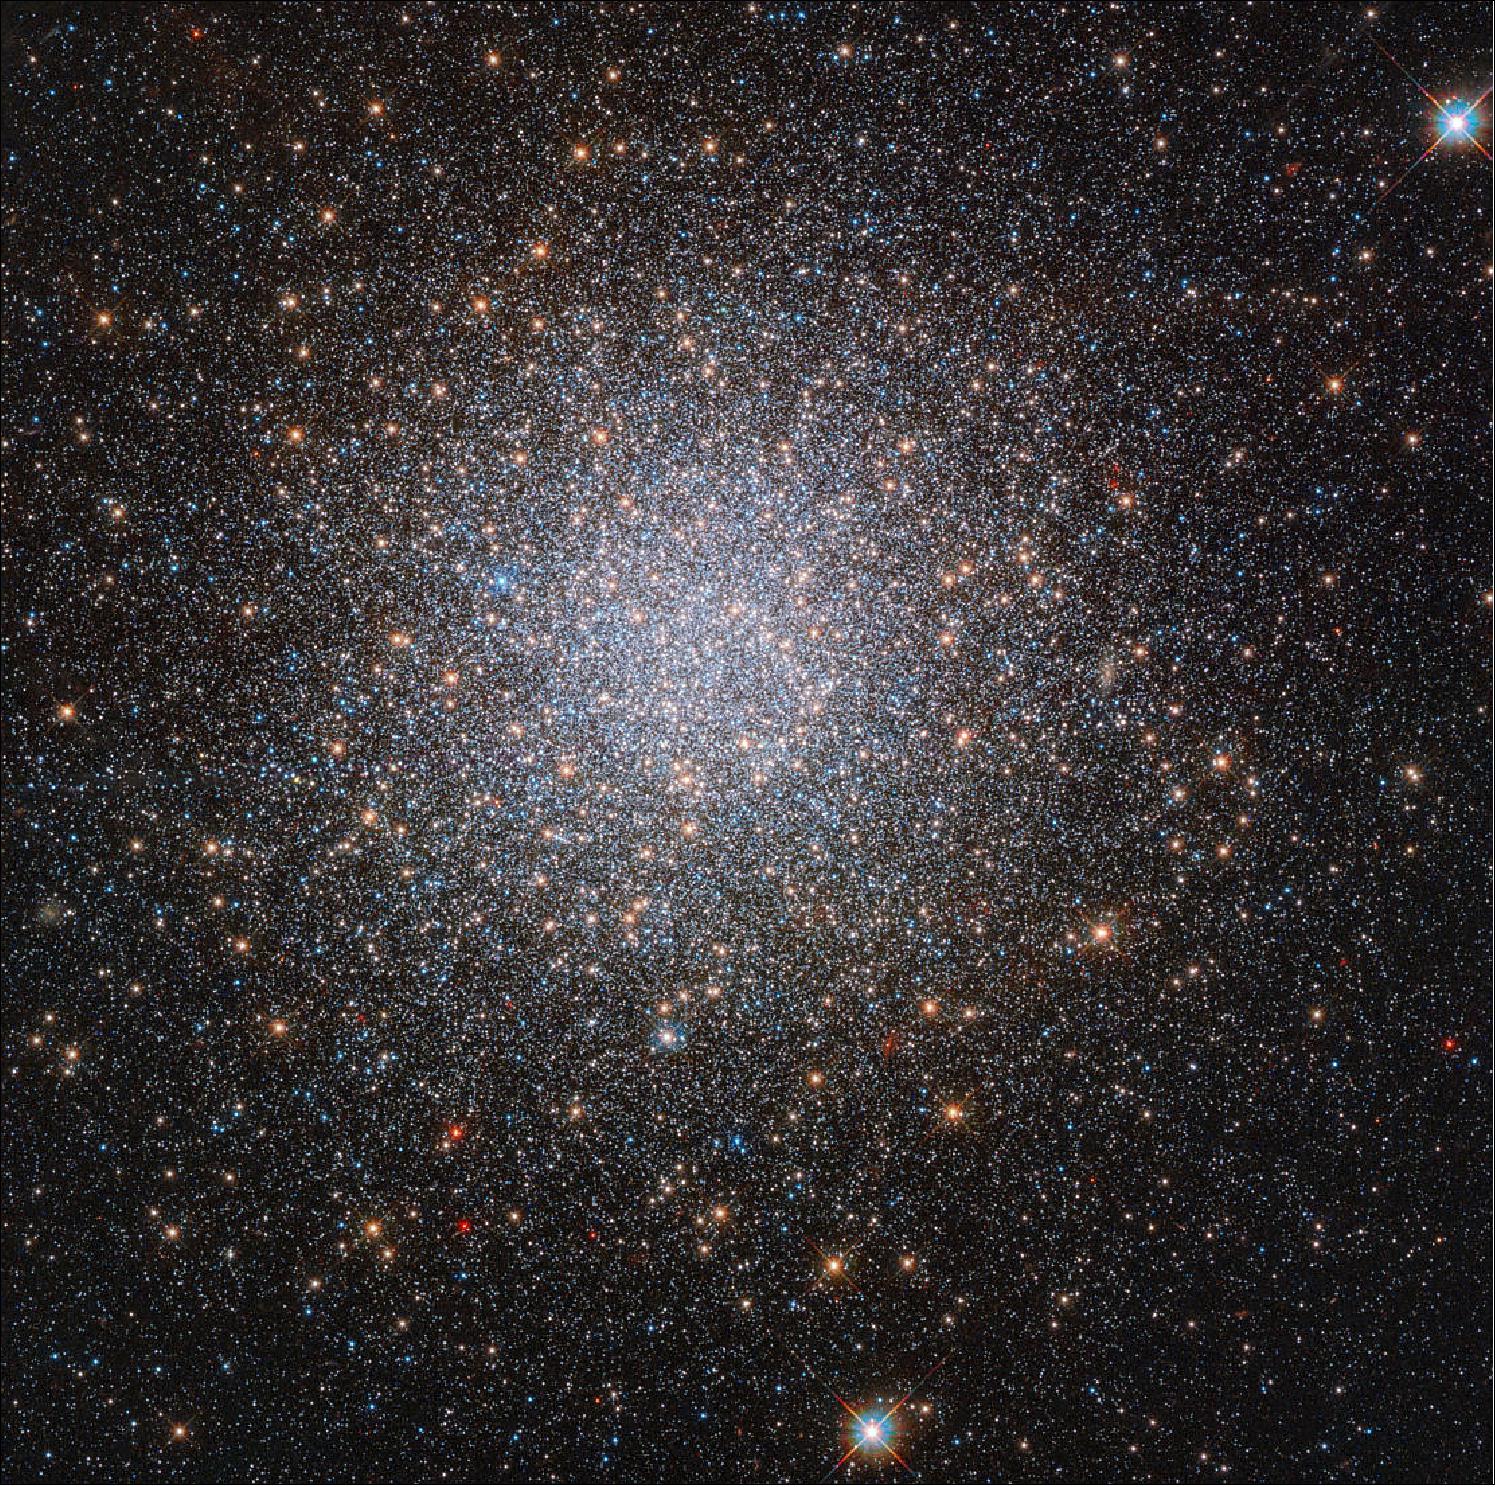 Figure 68: The two mysterious populations of NGC 2419 (image credit: ESA/Hubble & NASA, S. Larsen et al.; CC BY 4.0)